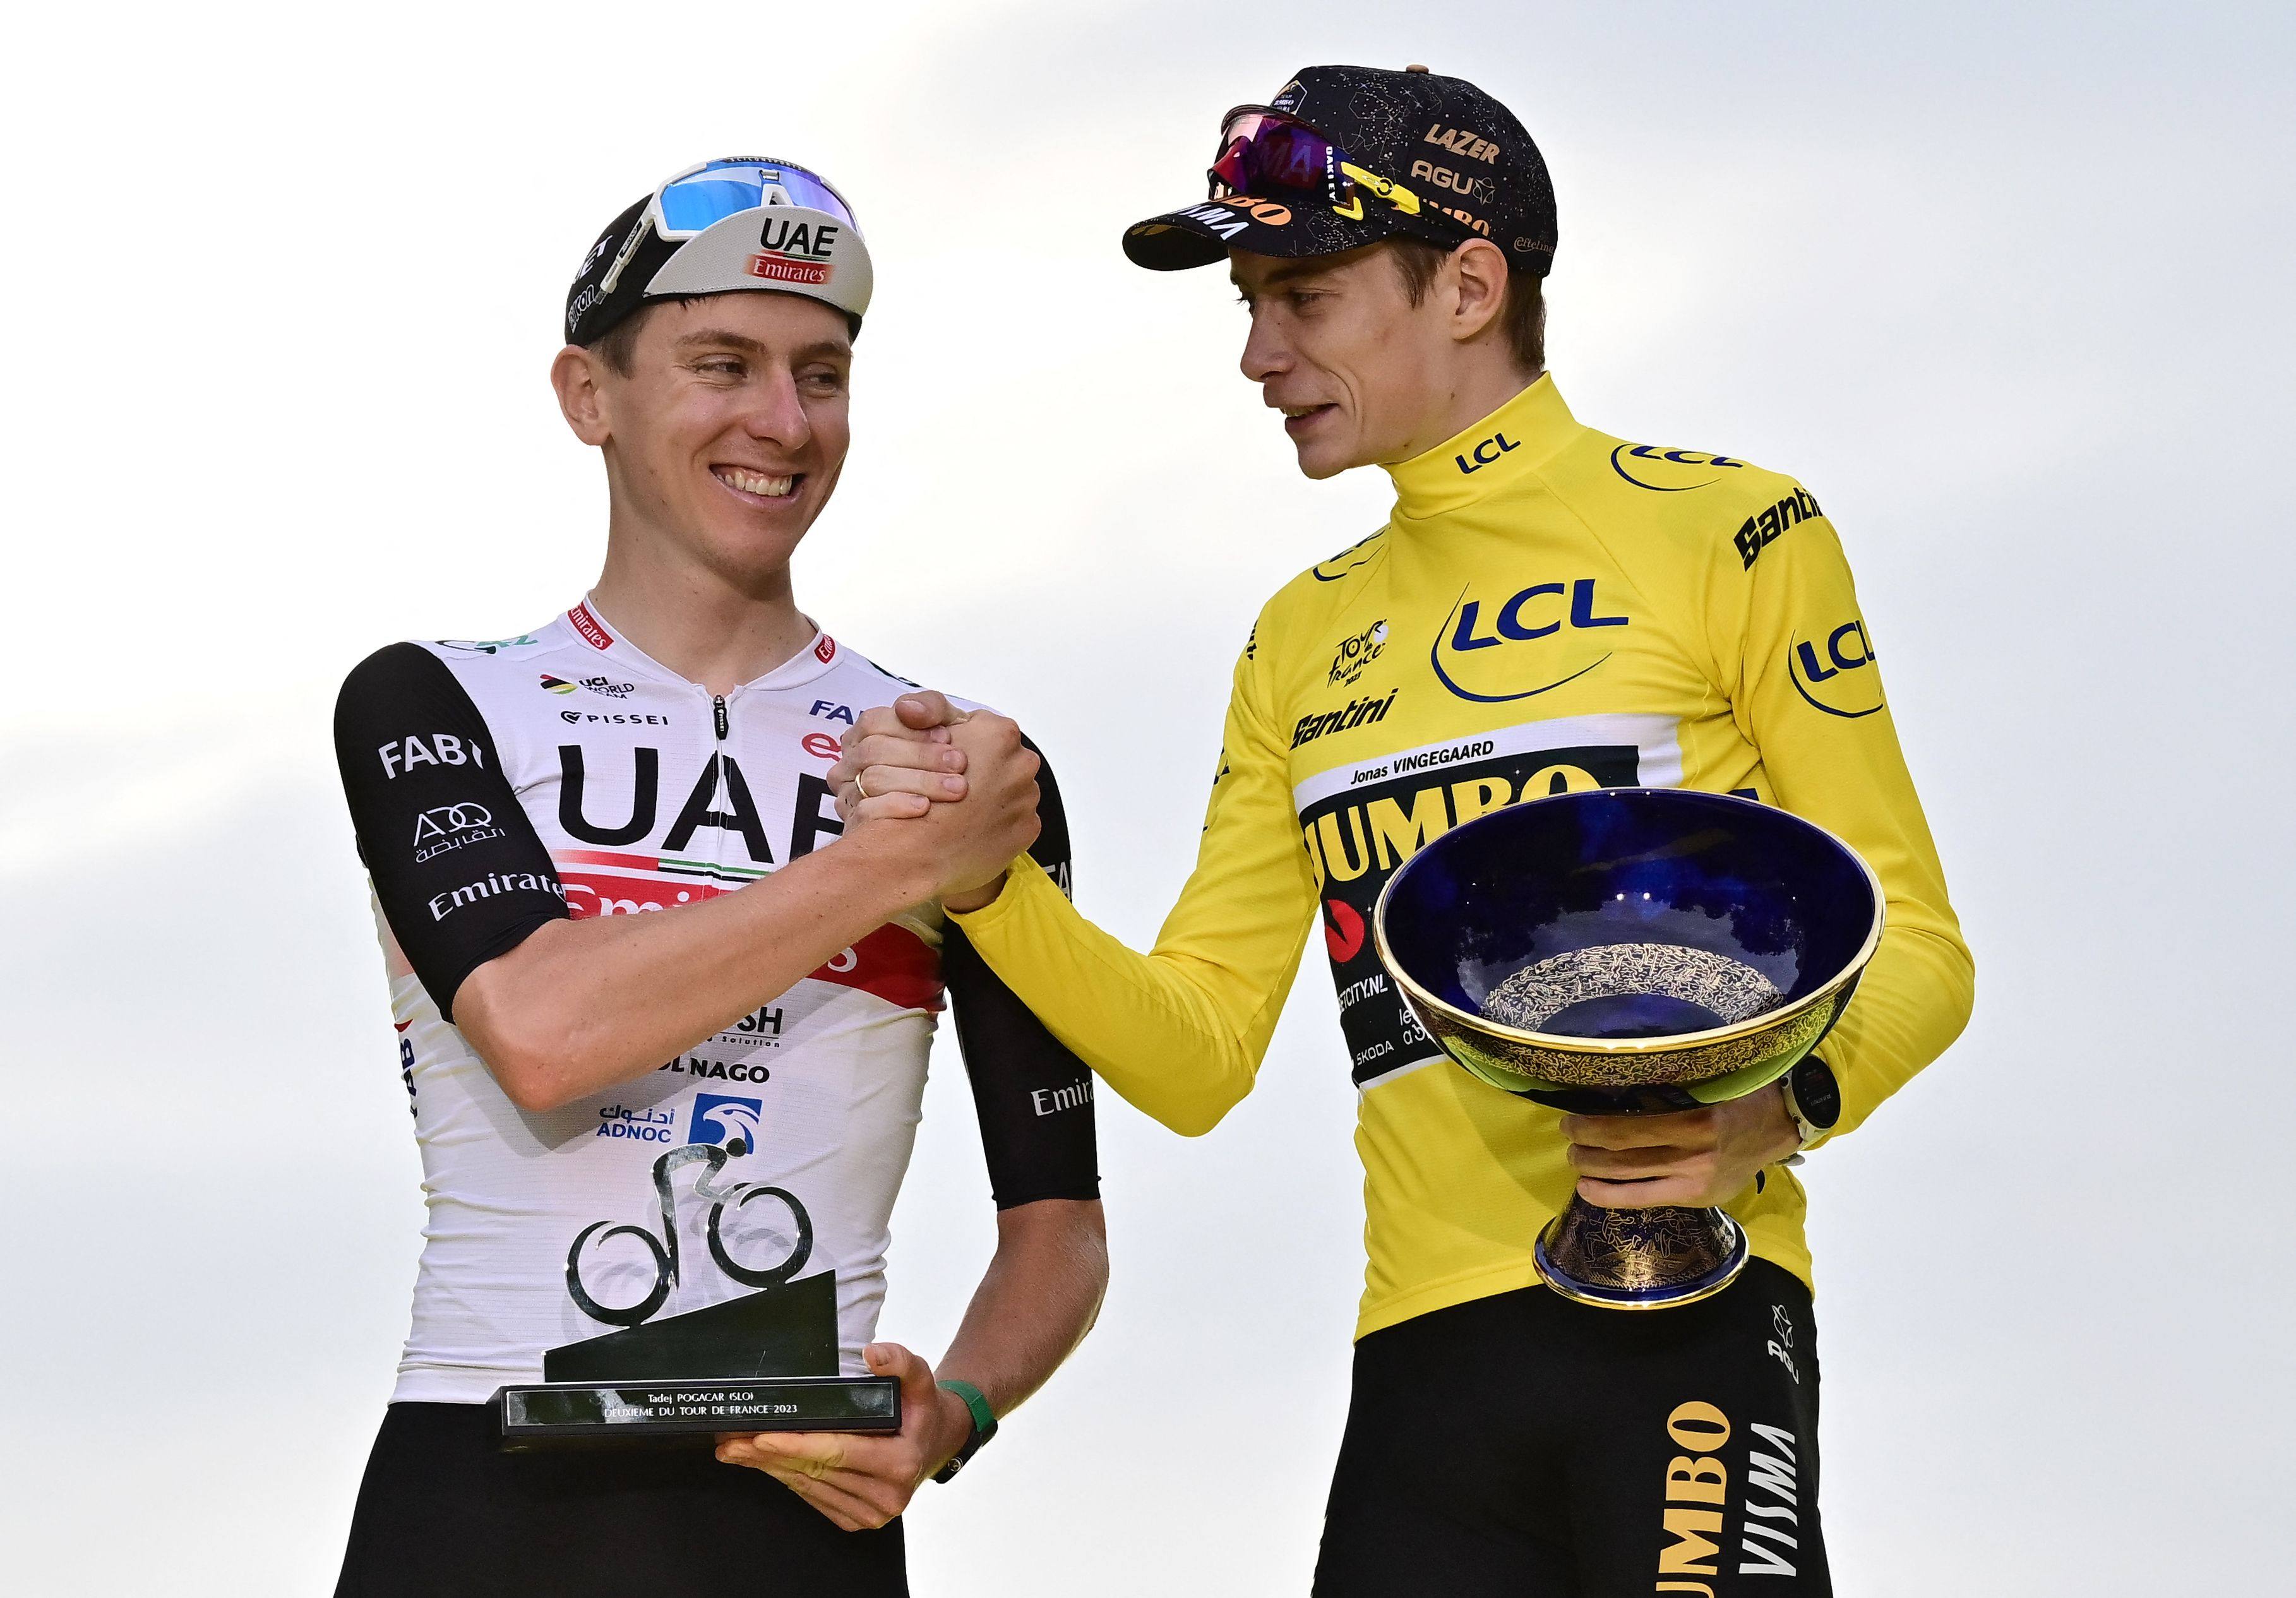 Jumbo-Visma’s Danish rider Jonas Vingegaard (right) with overall leader’s yellow jersey shakes hands with UAE Team Emirates’ Slovenian rider Tadej Pogacar after winning the 21st and final stage of the 110th edition of the Tour de France. Photo: AFP